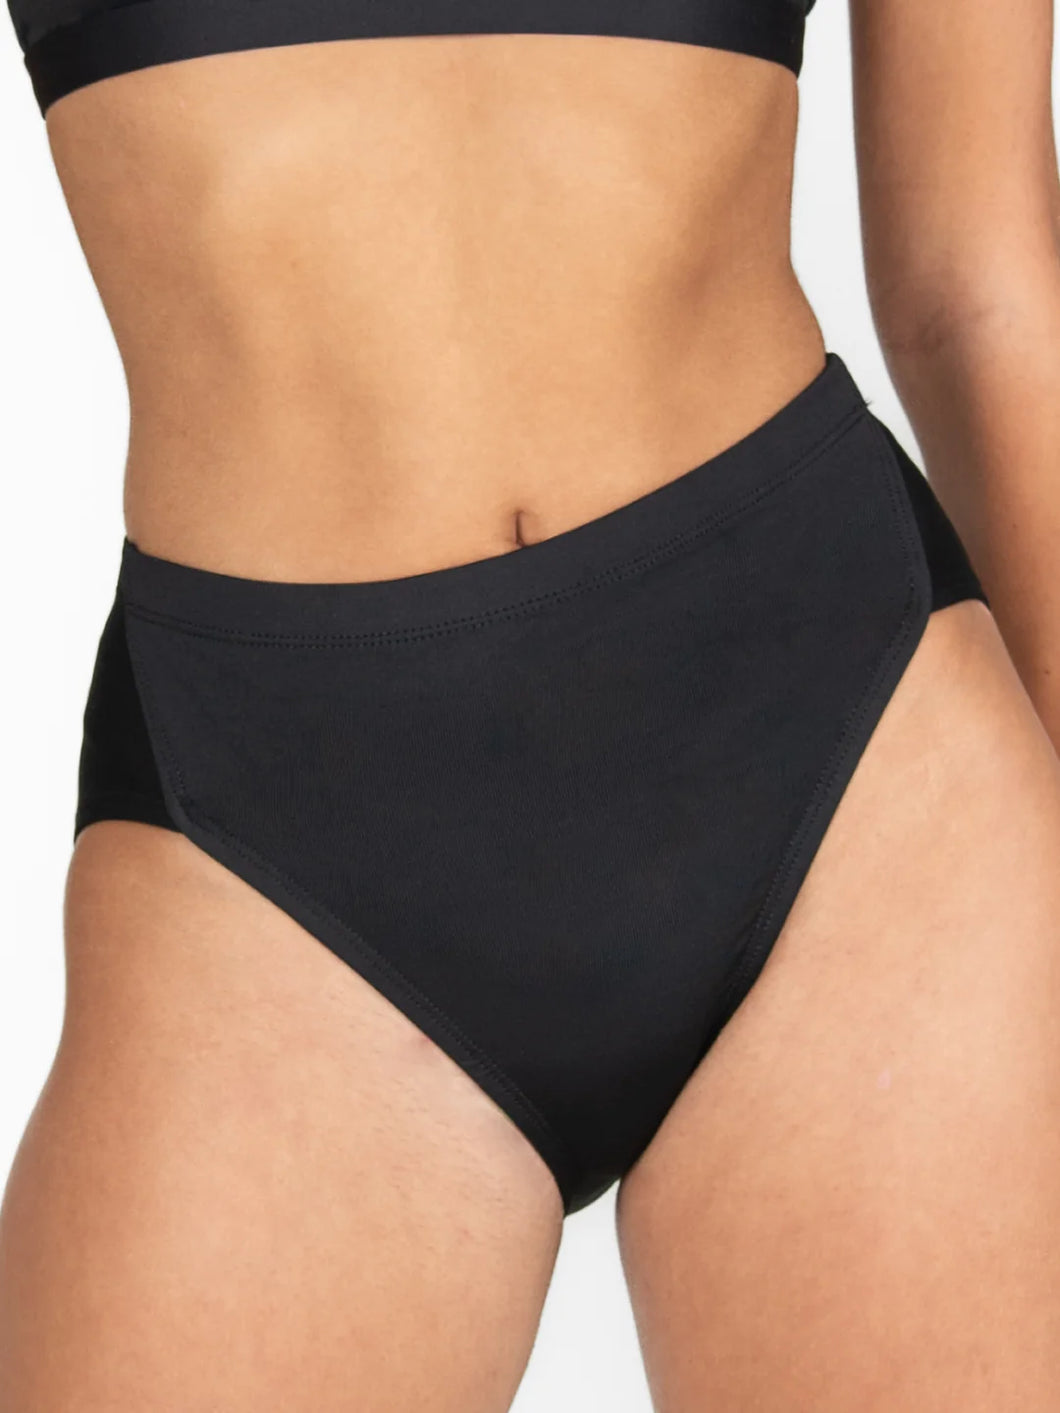 Body Wrappers High Cut Brief #BWP290